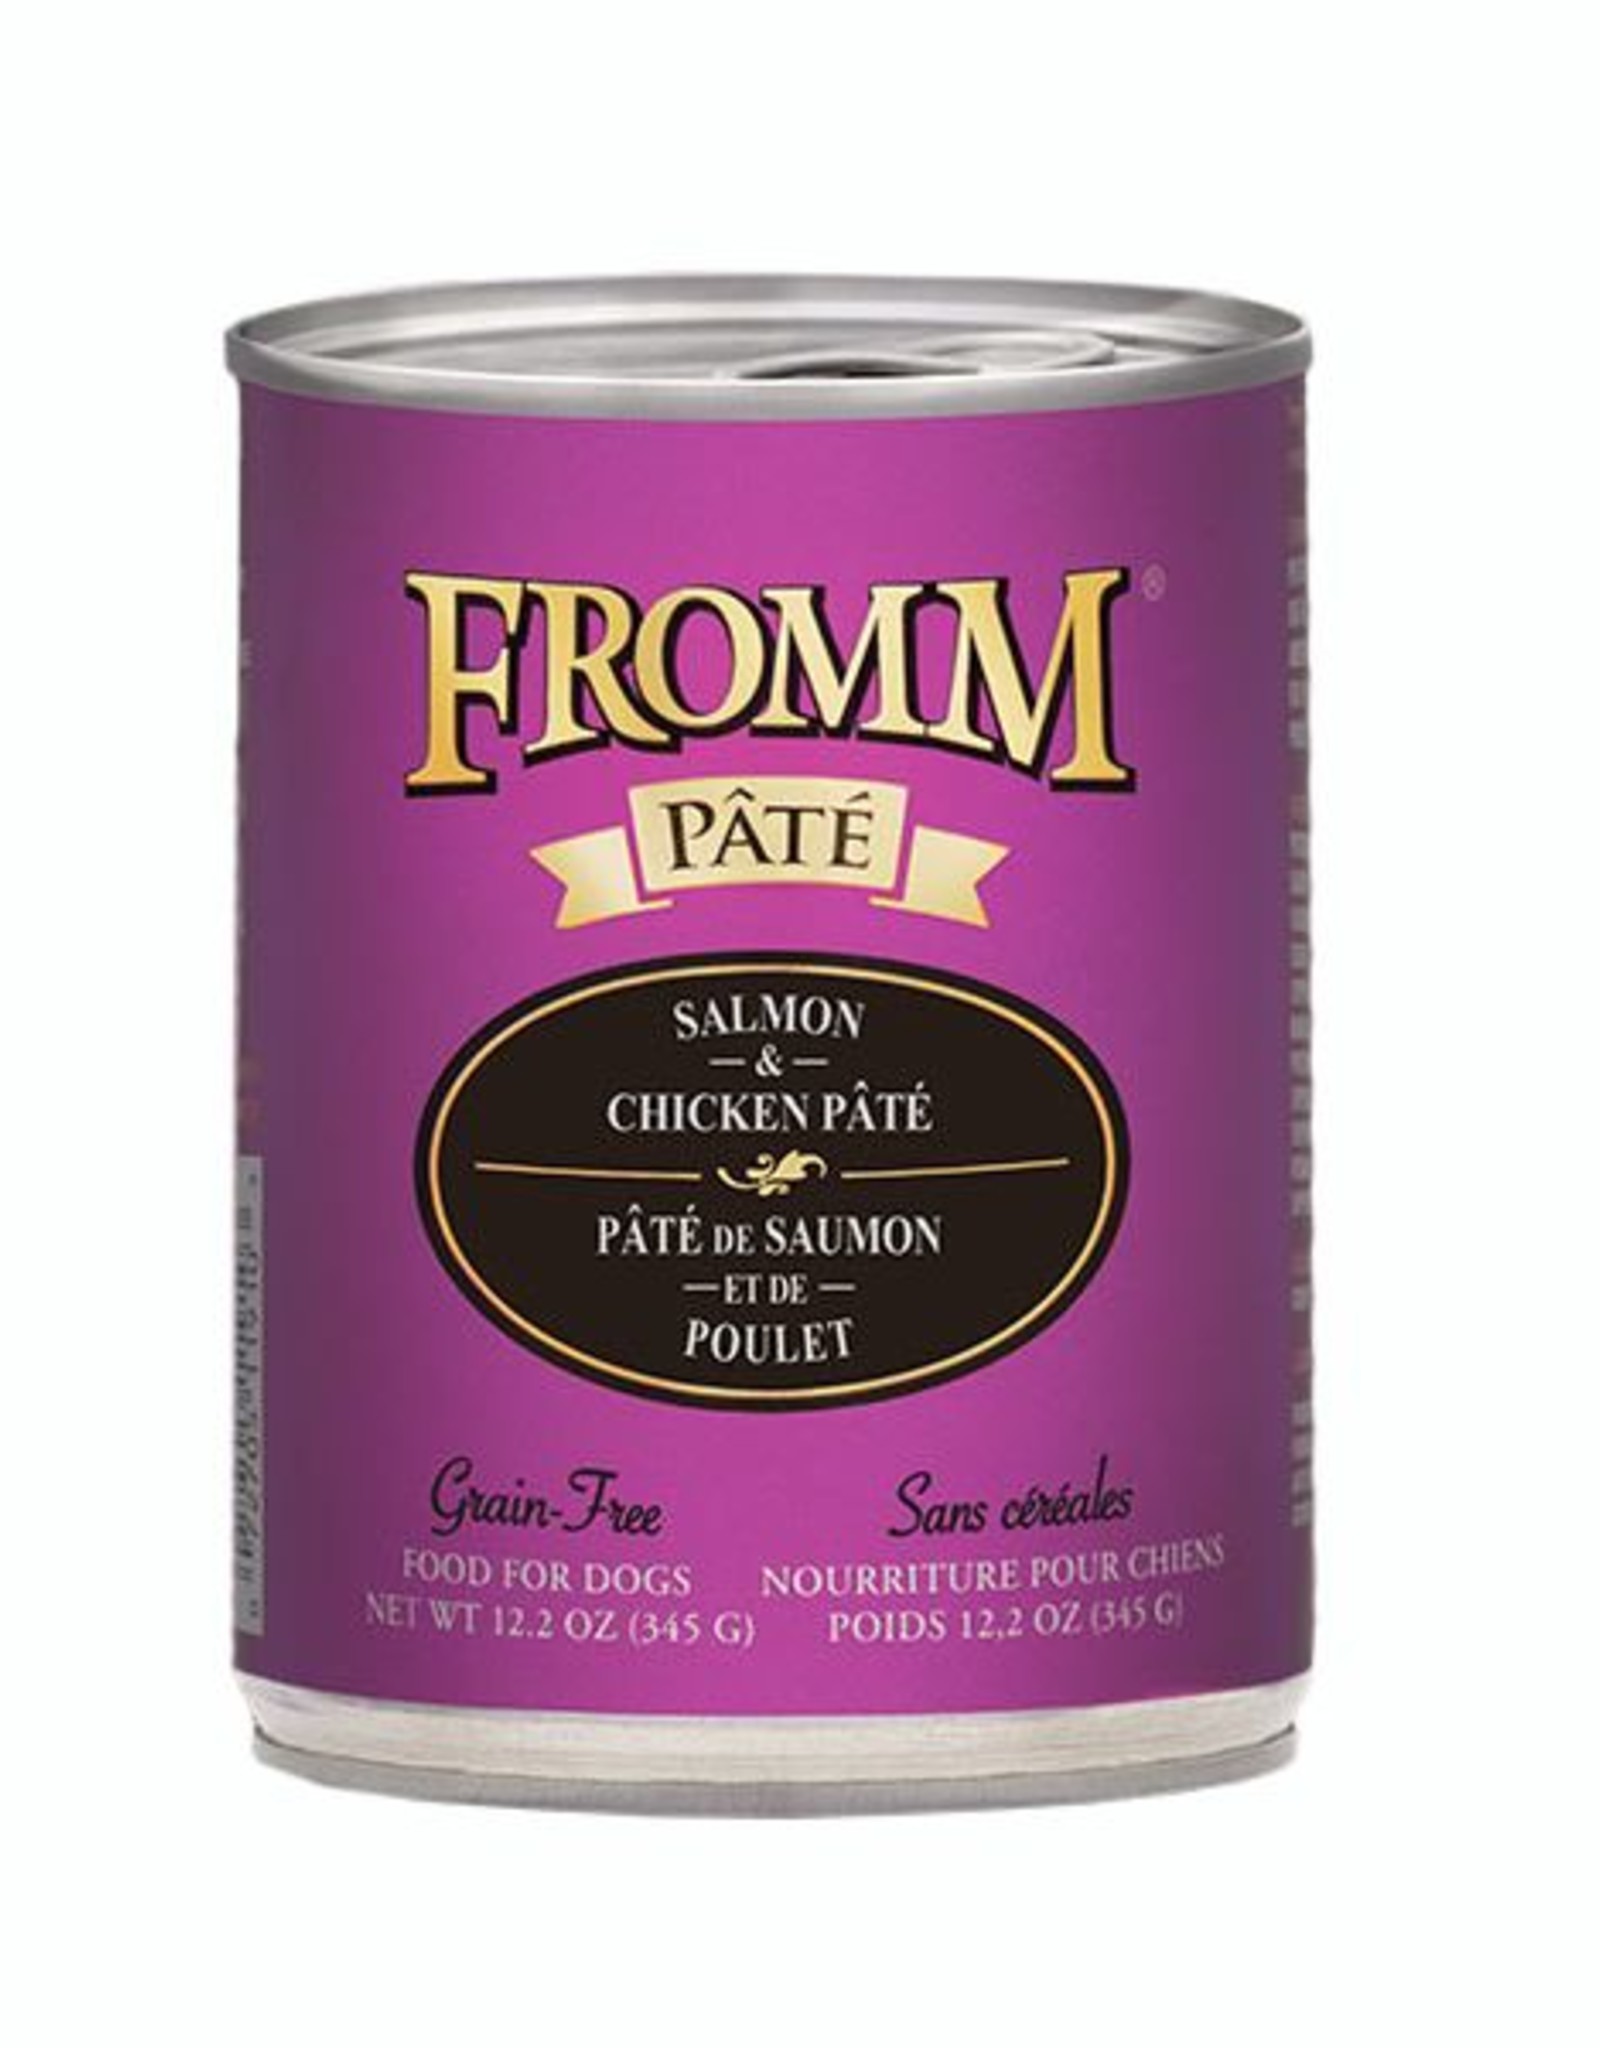 Fromm Gold Grain-Free Salmon and Chicken Pate Canned Dog Food 12.2-oz Case of 12